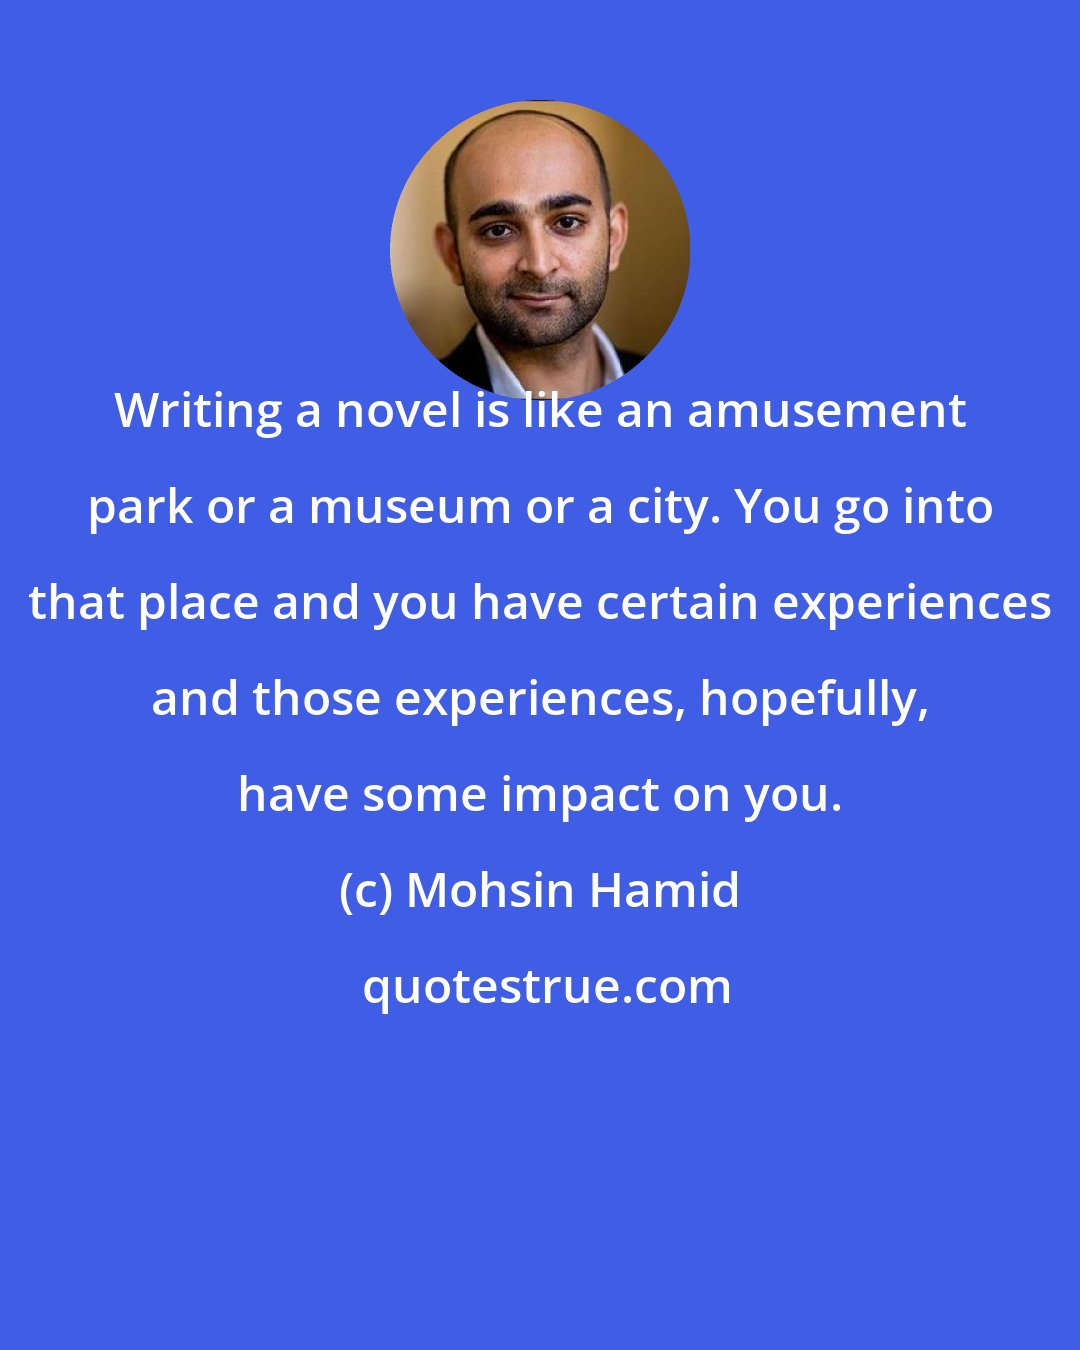 Mohsin Hamid: Writing a novel is like an amusement park or a museum or a city. You go into that place and you have certain experiences and those experiences, hopefully, have some impact on you.